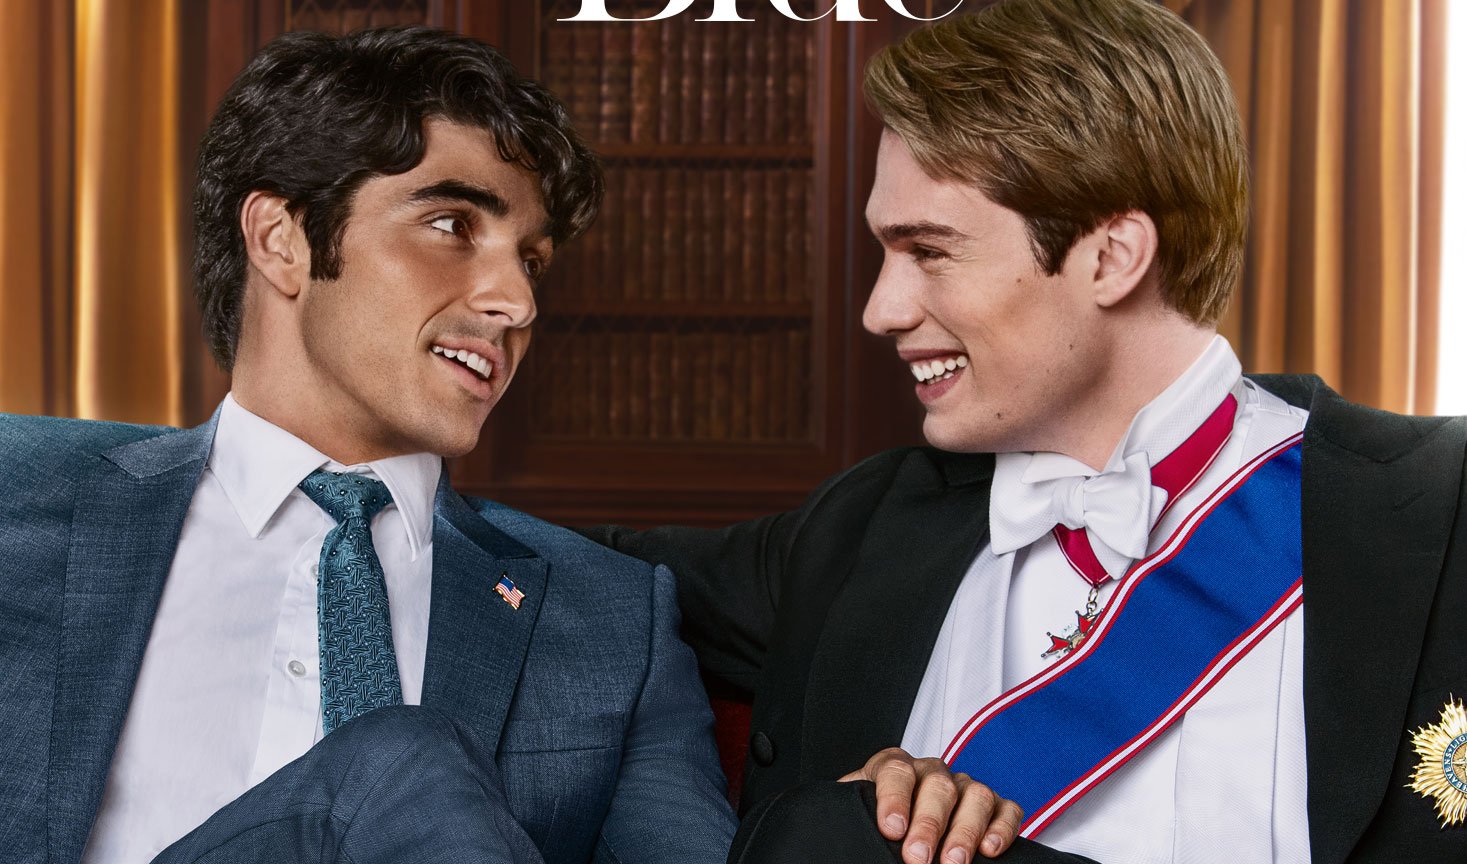 Taylor Zakhar Perez & Nicholas Galitzine Make a Cute Couple in ‘Red, White & Royal Blue’ Movie Poster!